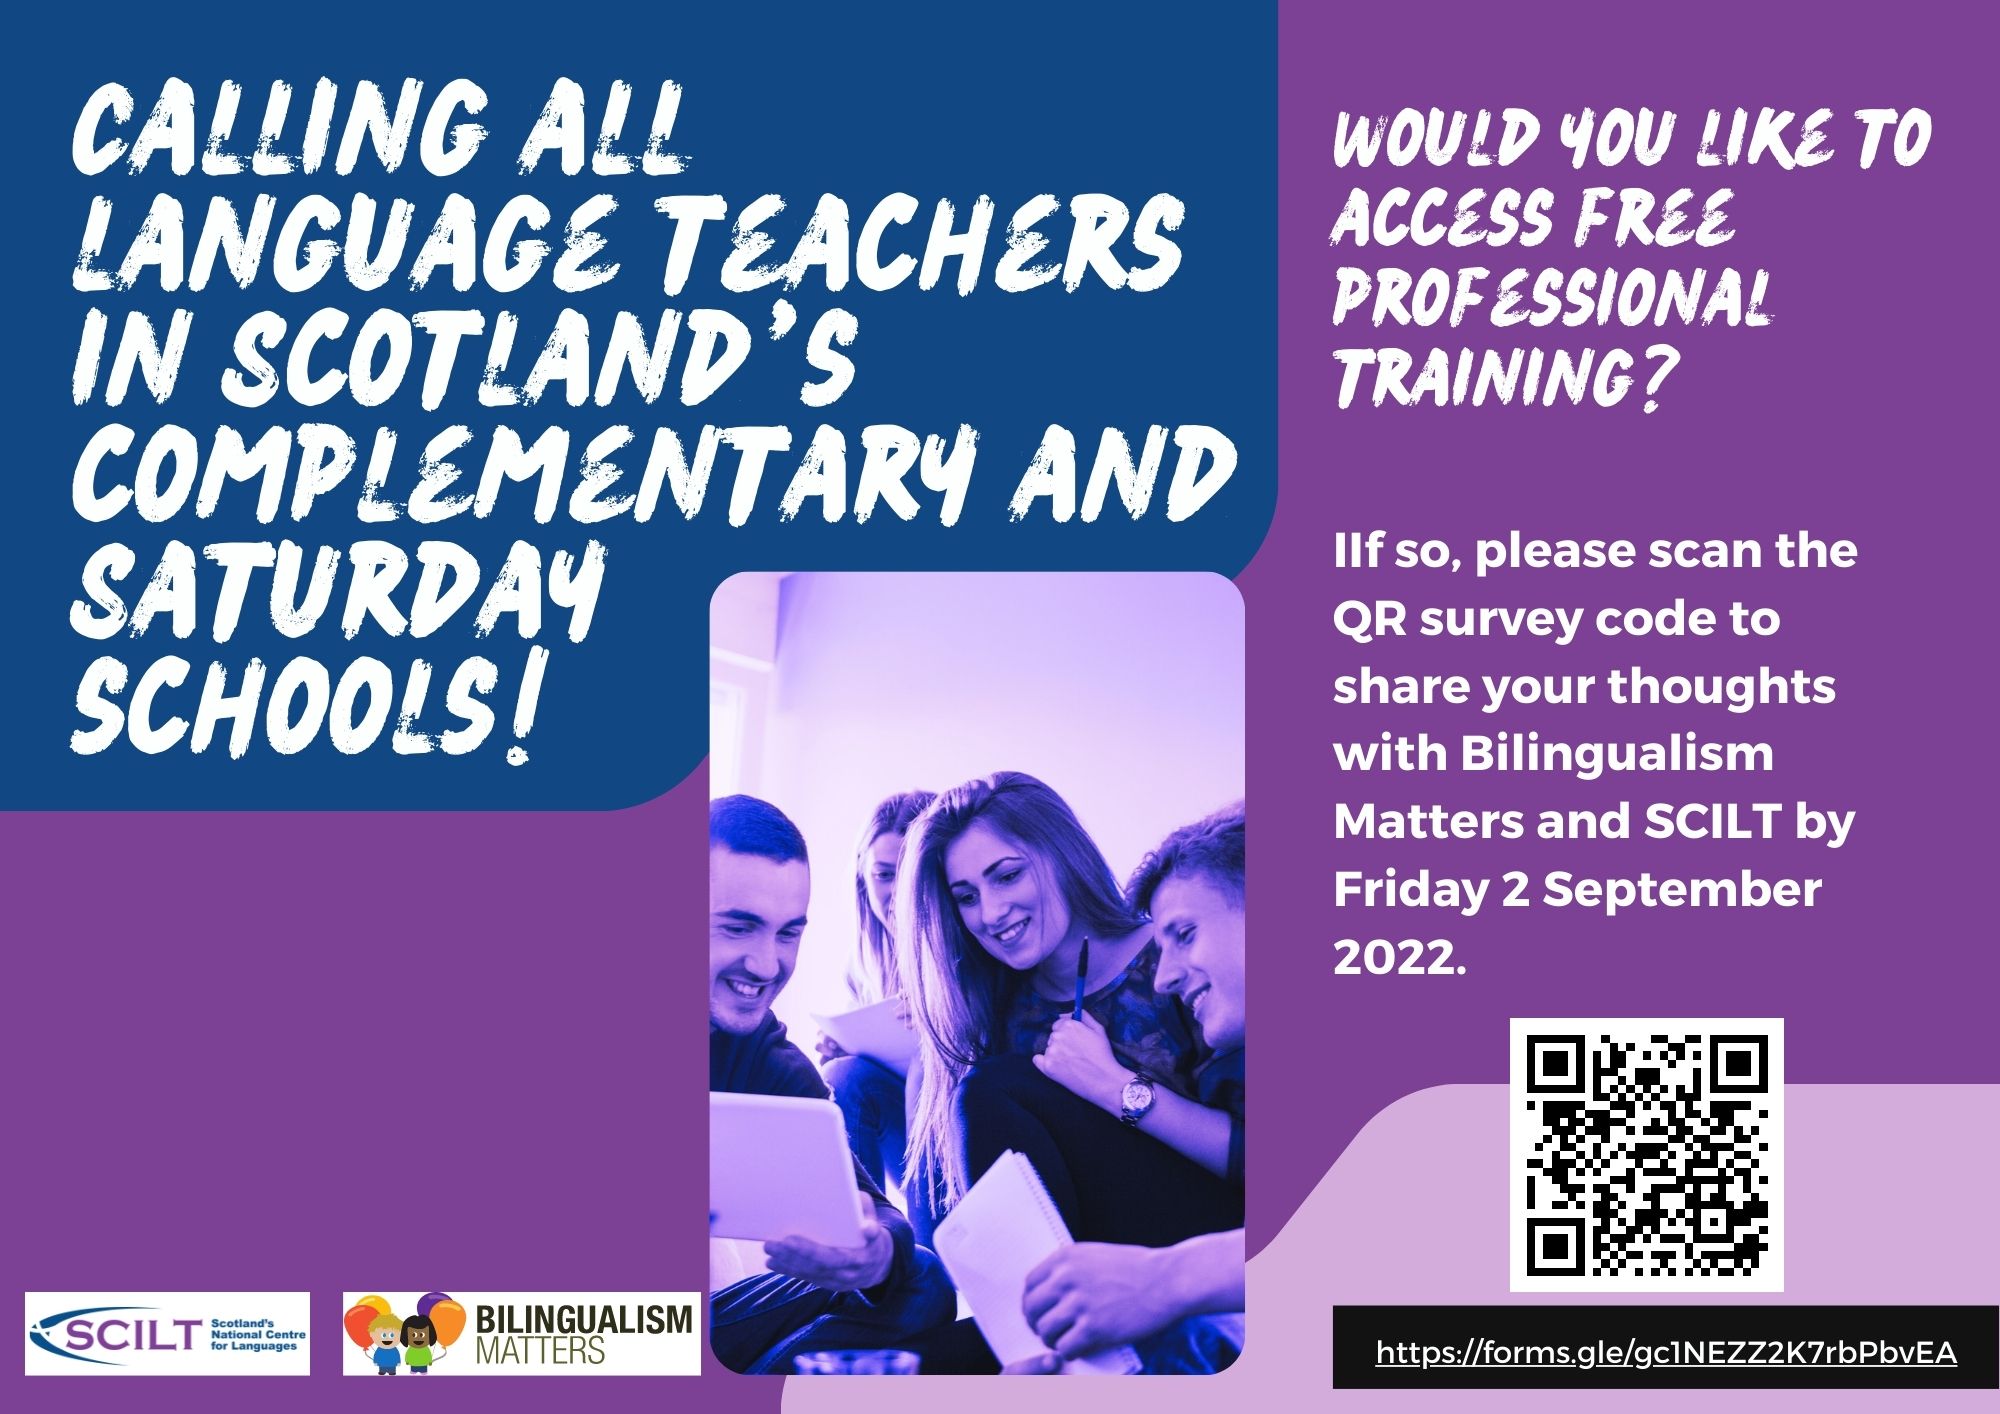 flyer promoting professional learning opportunity for language teachers in Scotland's complementary and Saturday schools